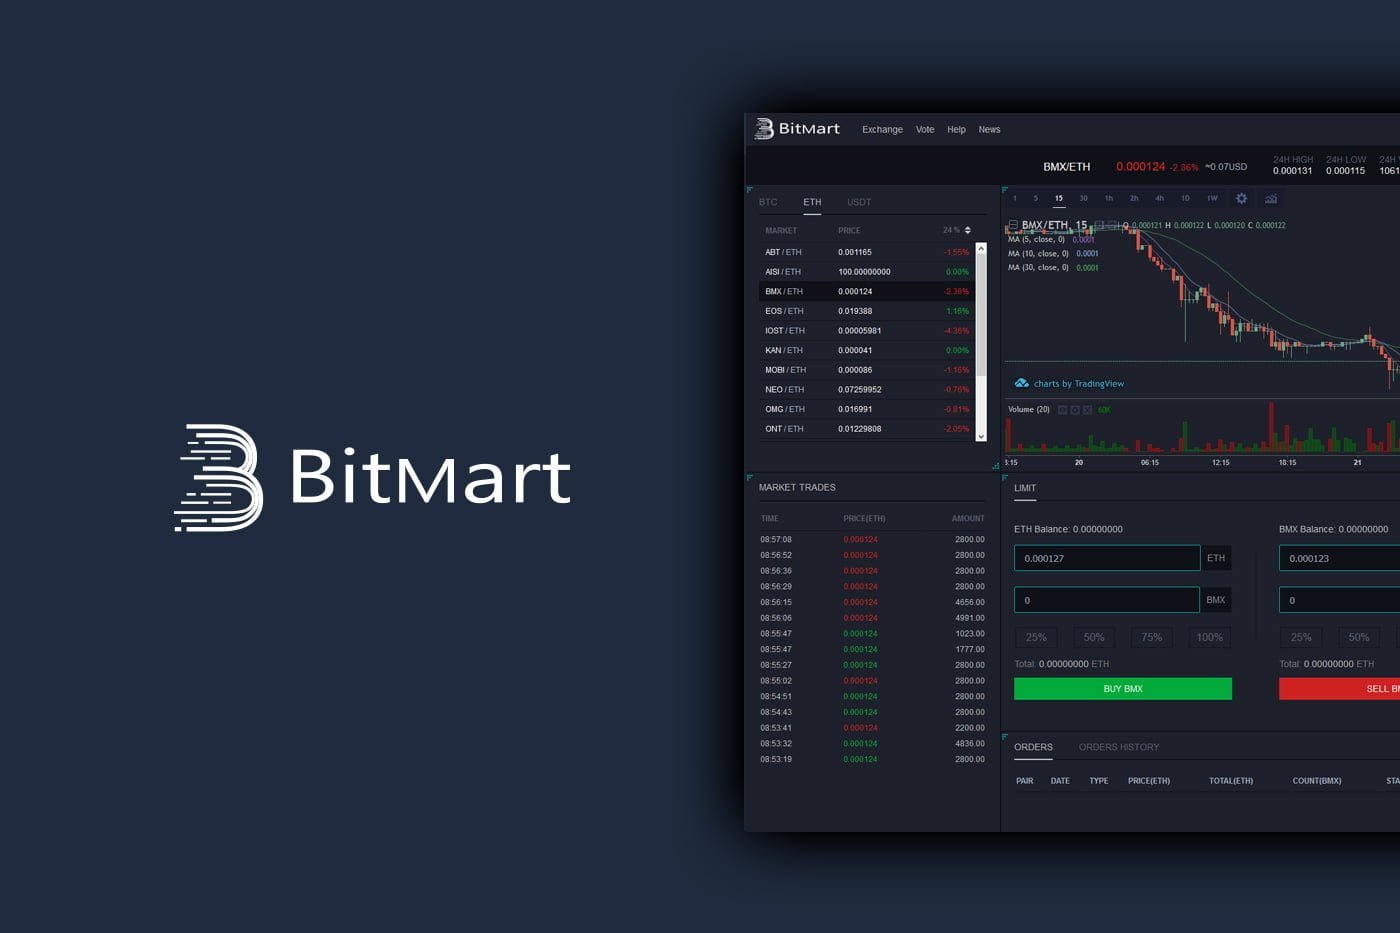 Bitmart - Buy & Sell Bitcoin, Ethereum, Tether Instantly